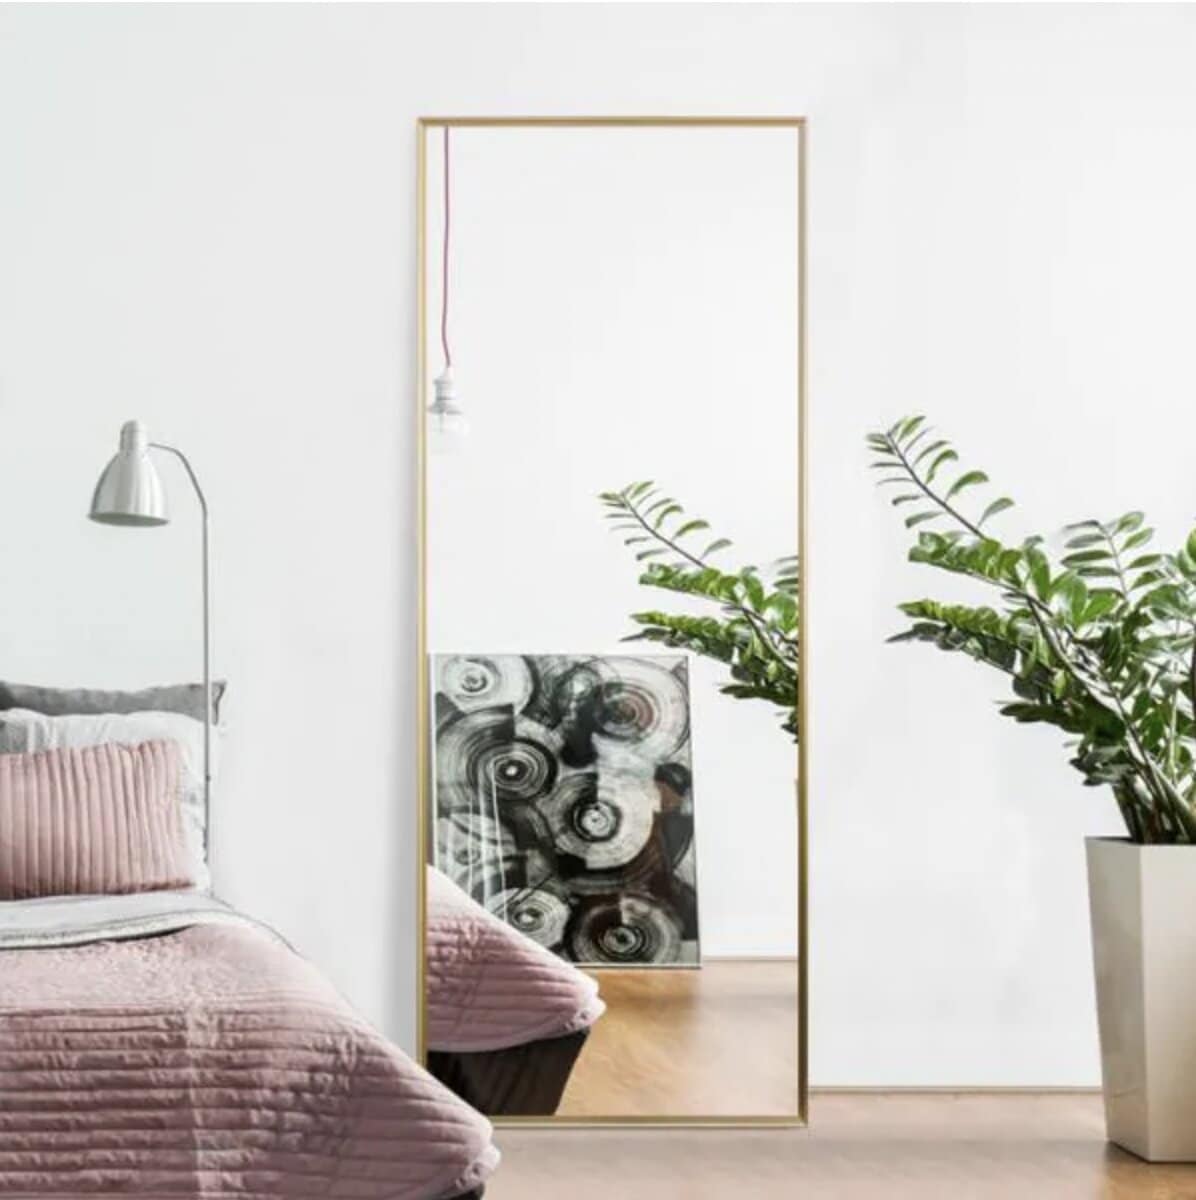 15 Cheap Floor Length Mirrors No One Will Ever Know You Skimped On Buying -  By Sophia Lee